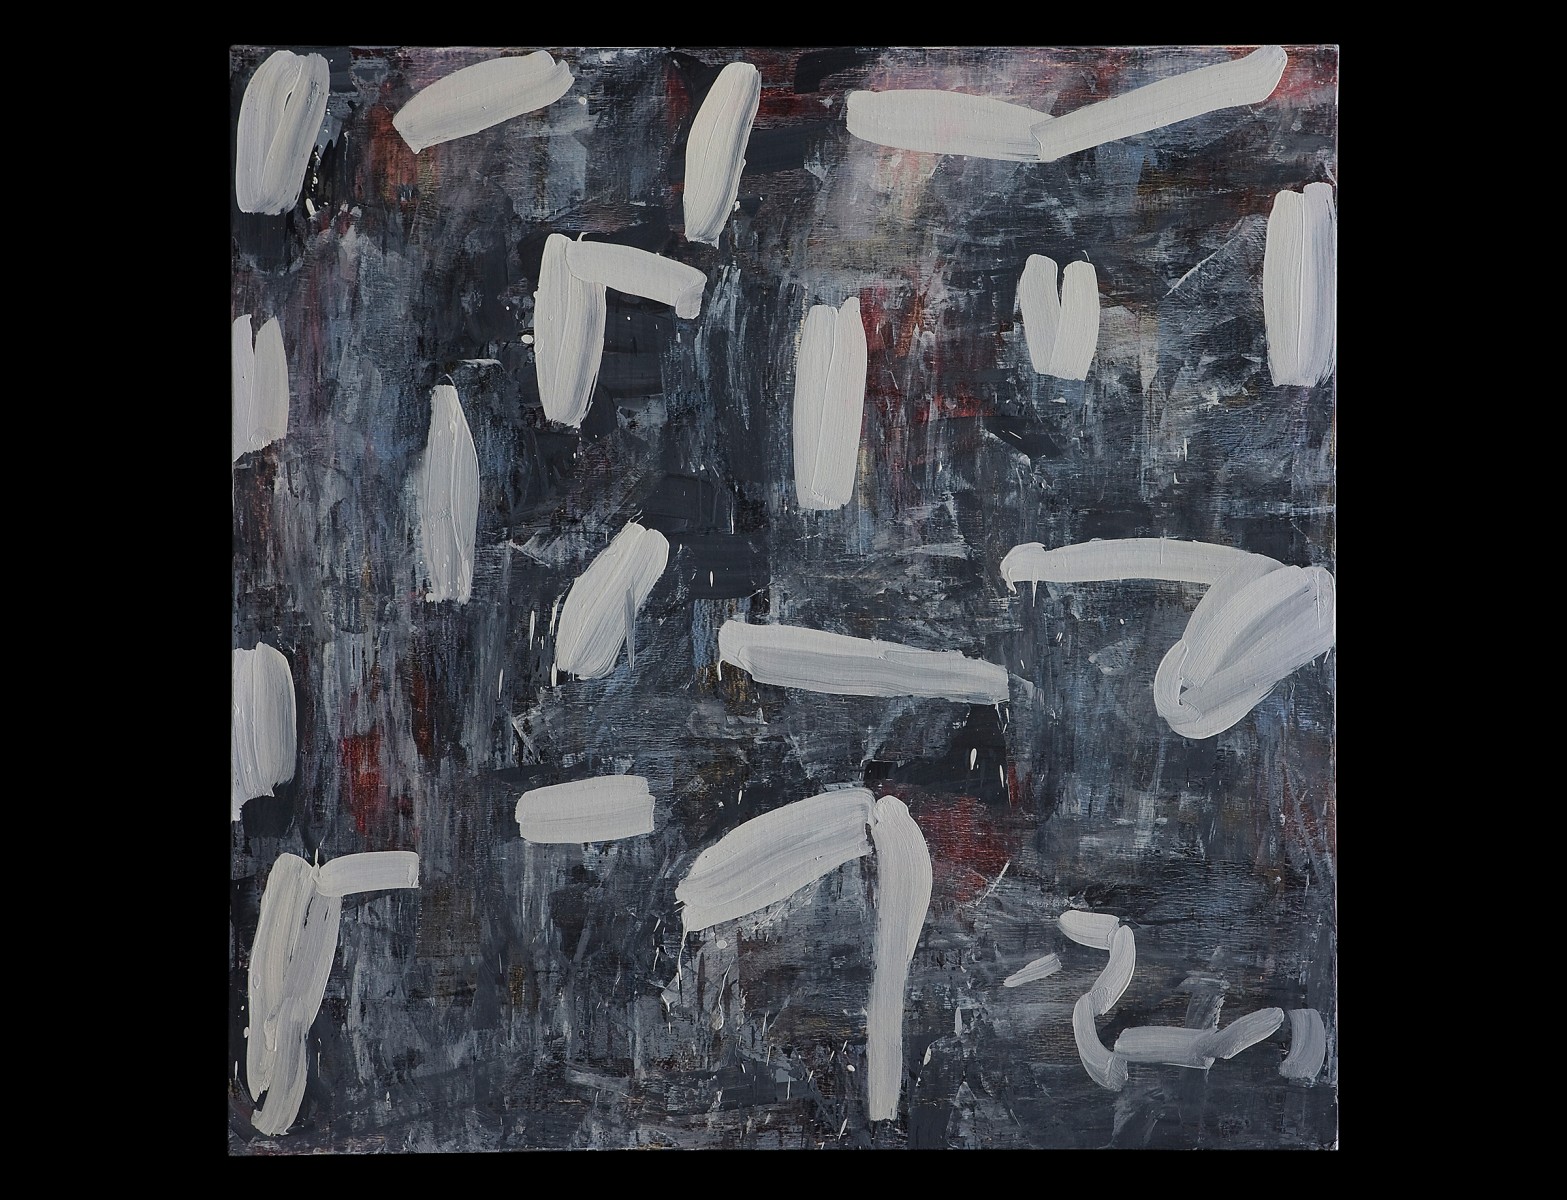 Untitled-95058, 1995, Oil on Canvas, 120x120cm